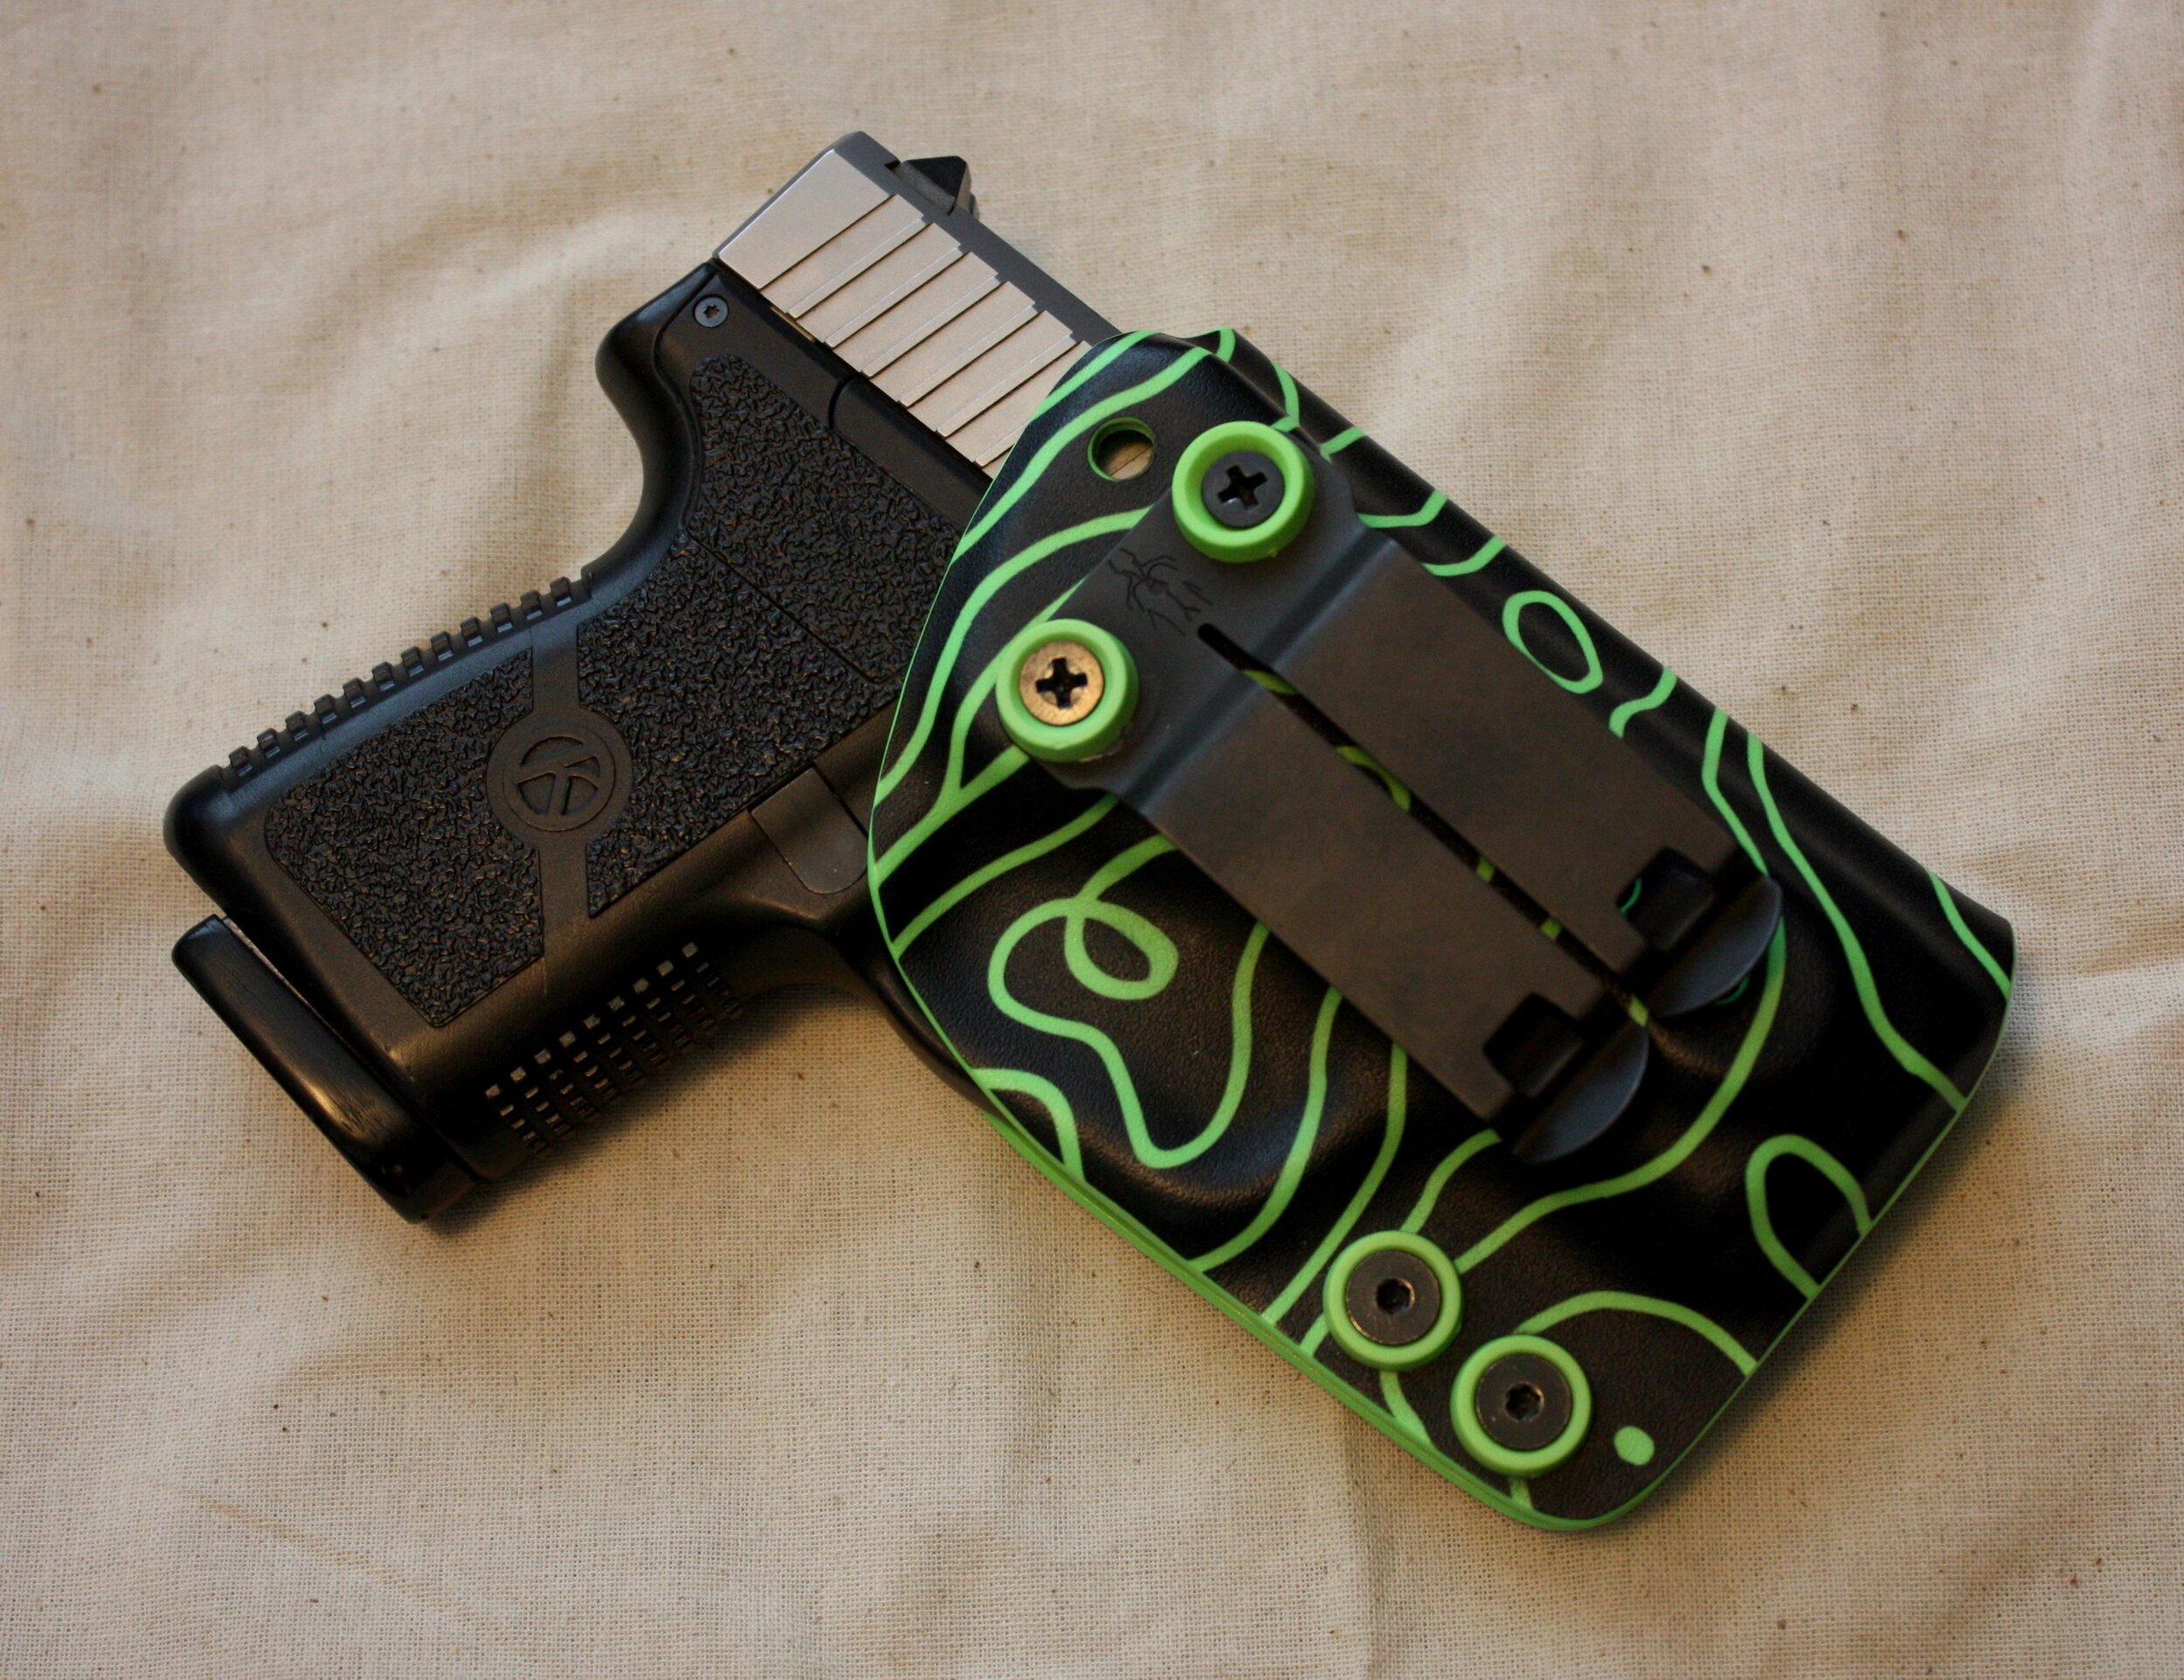 Handcrafted aesthetic quality and design Clip holster for 9mm firearms,don't mis 